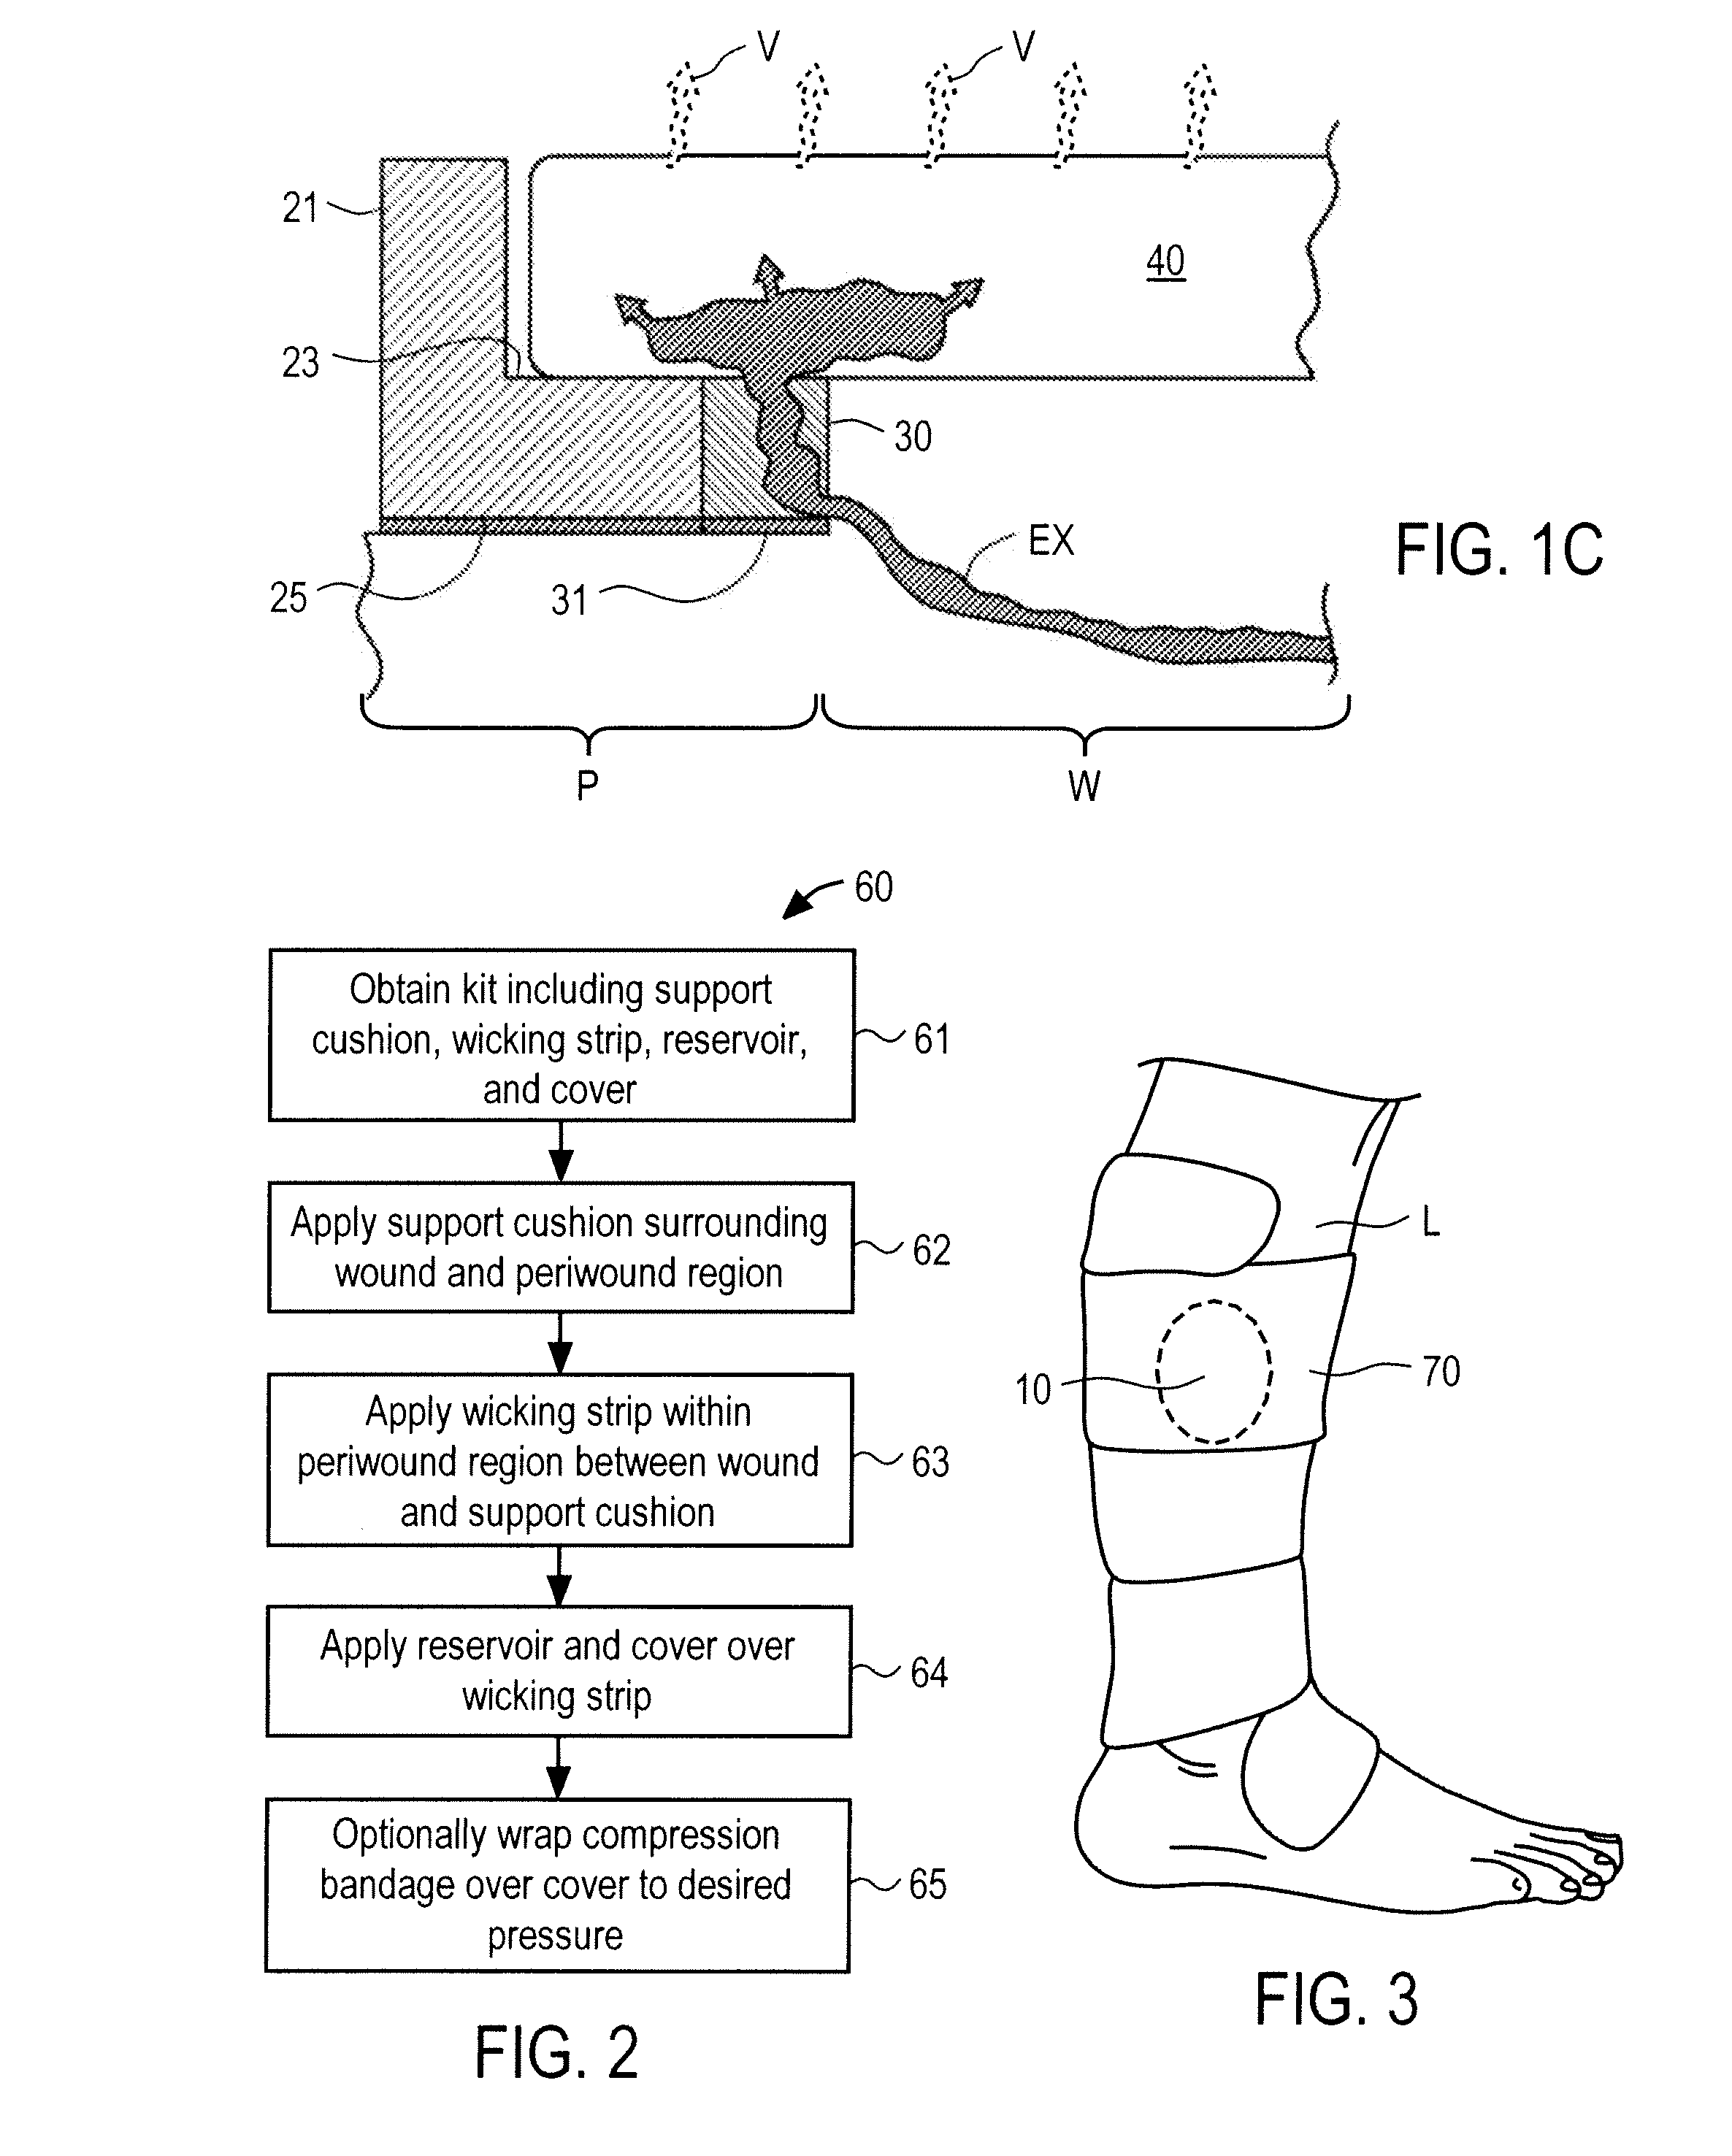 Secondary Wound Dressings for Securing Primary Dressings and Managing Fluid from Wounds, and Methods of Using Same